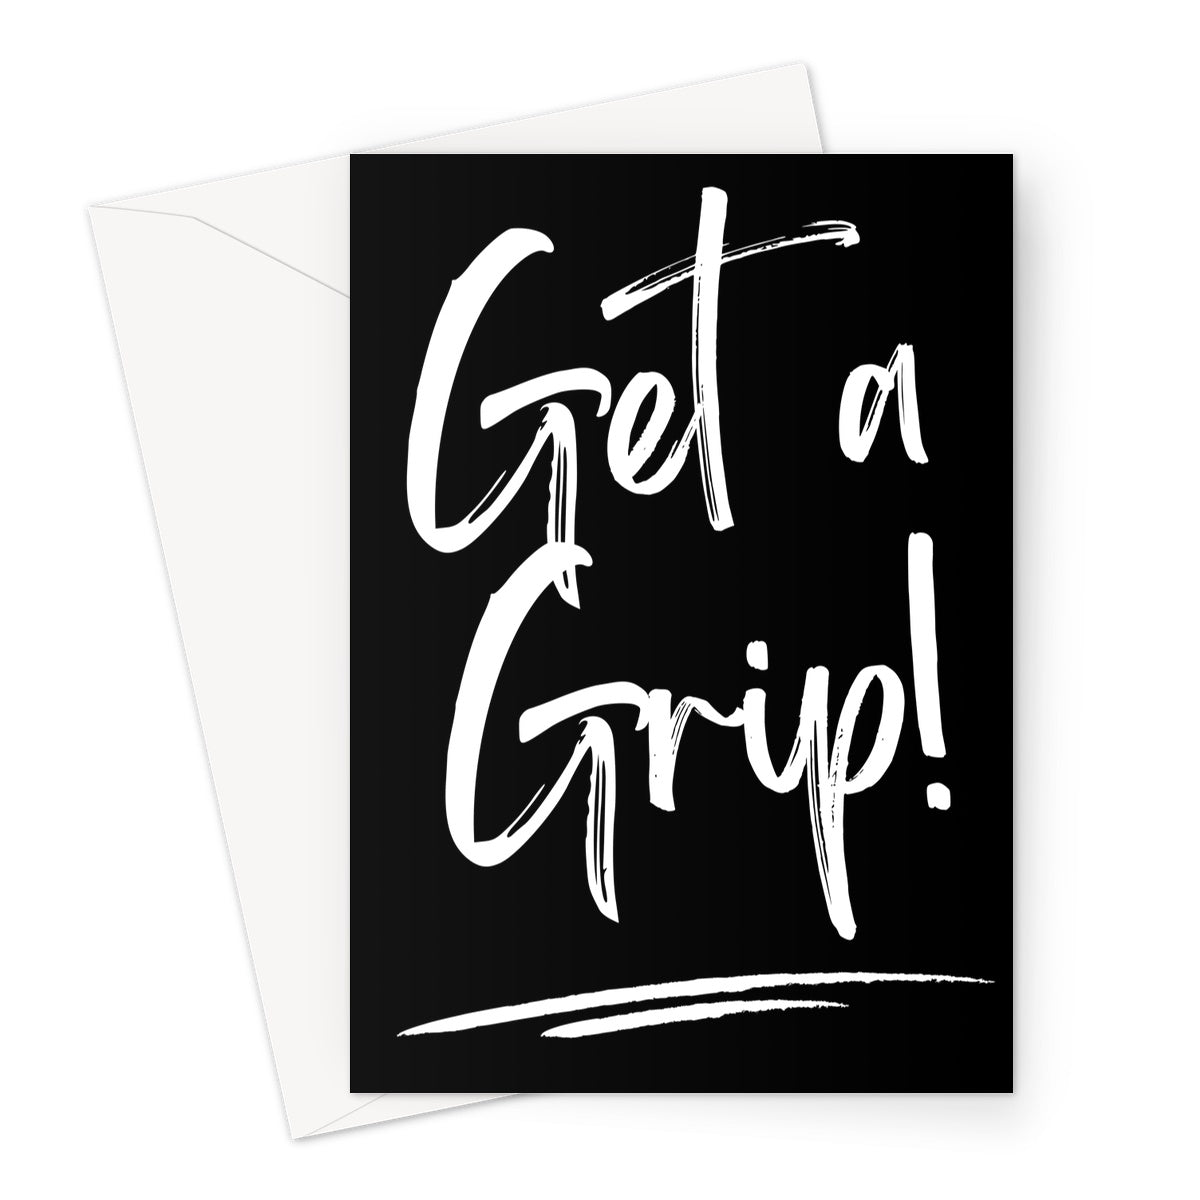 Blank greeting card with black background and the words 'Get a Grip' written in a large, white, handwriting-style font. The words are underlined by two white strokes at the bottom of the blank greeting card.